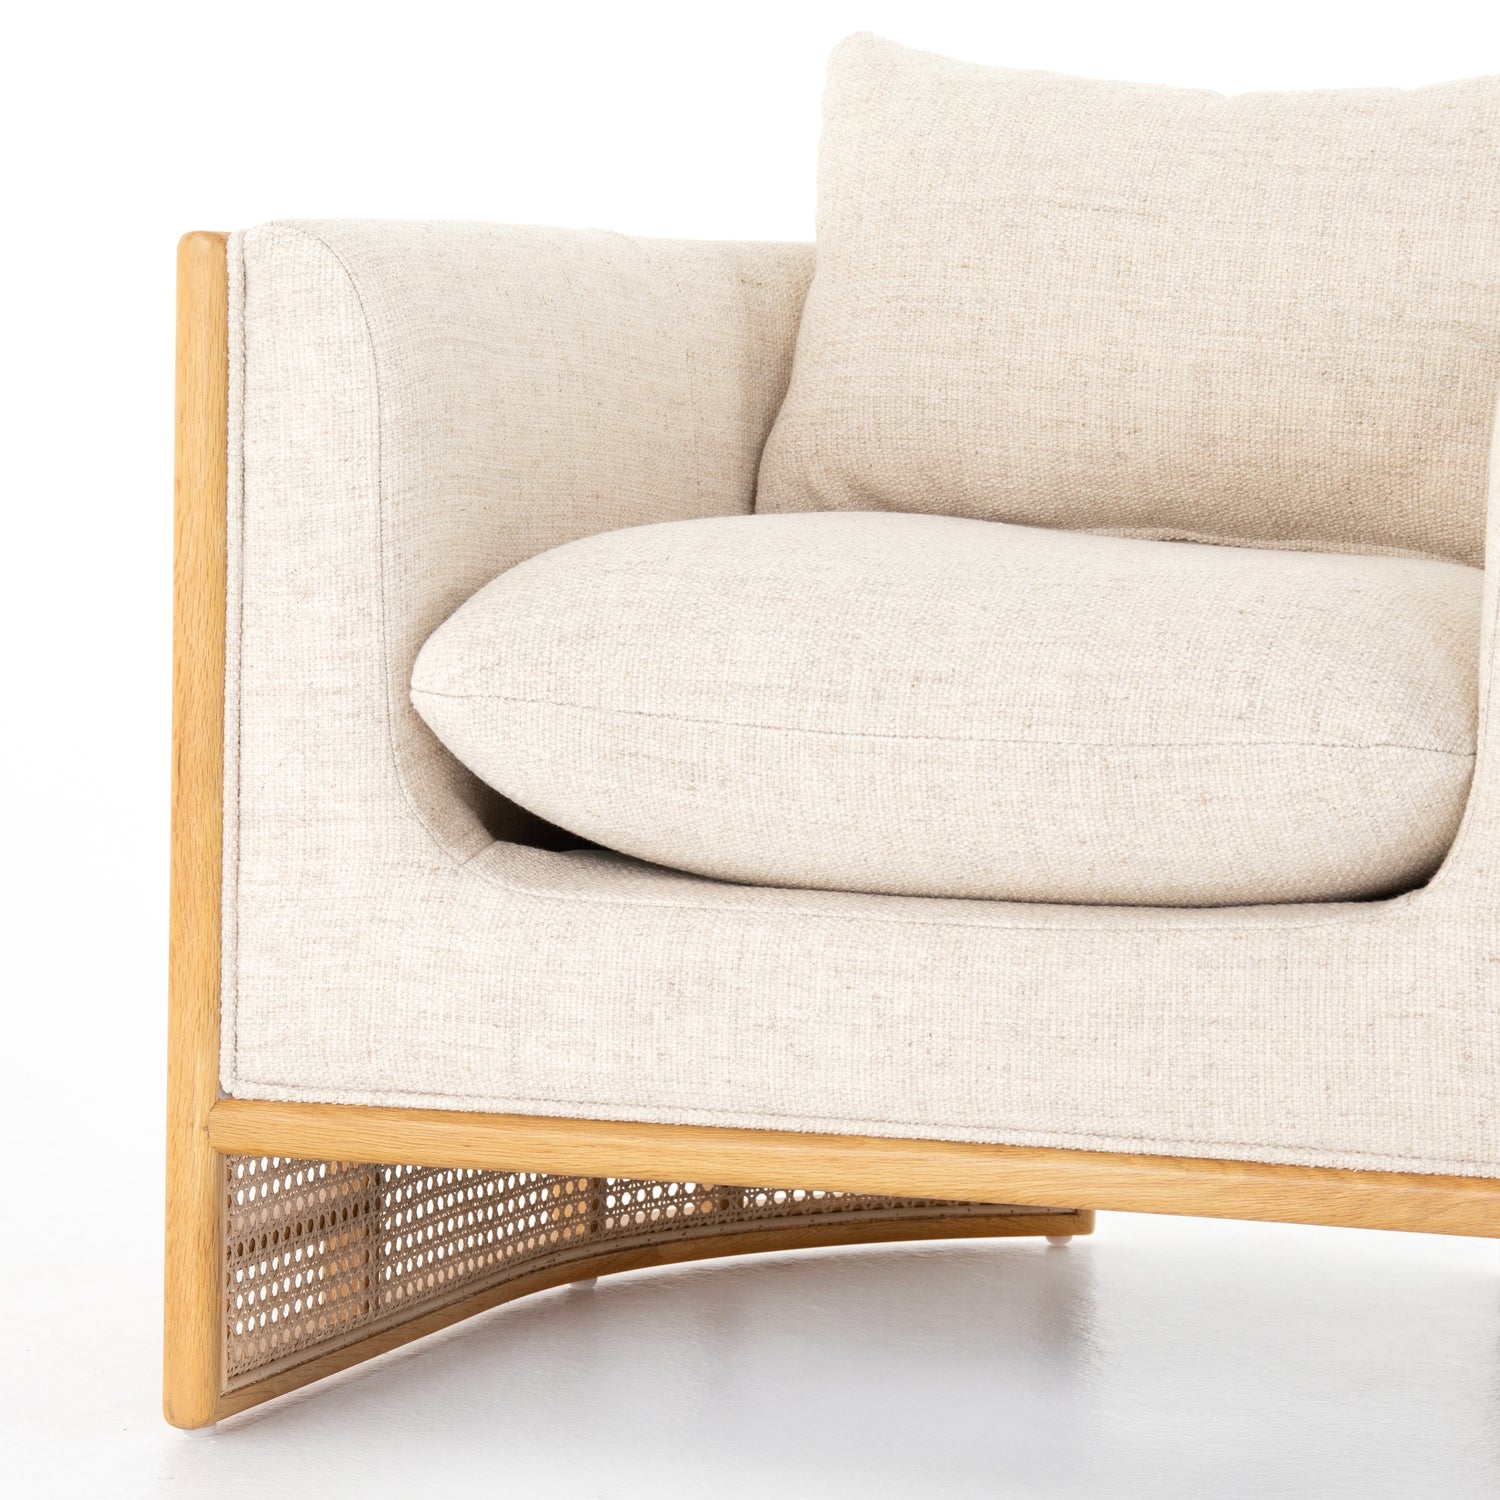 Thames Cream Fabric & Natural Cane with Natural Oak | June Chair | Valley Ridge Furniture